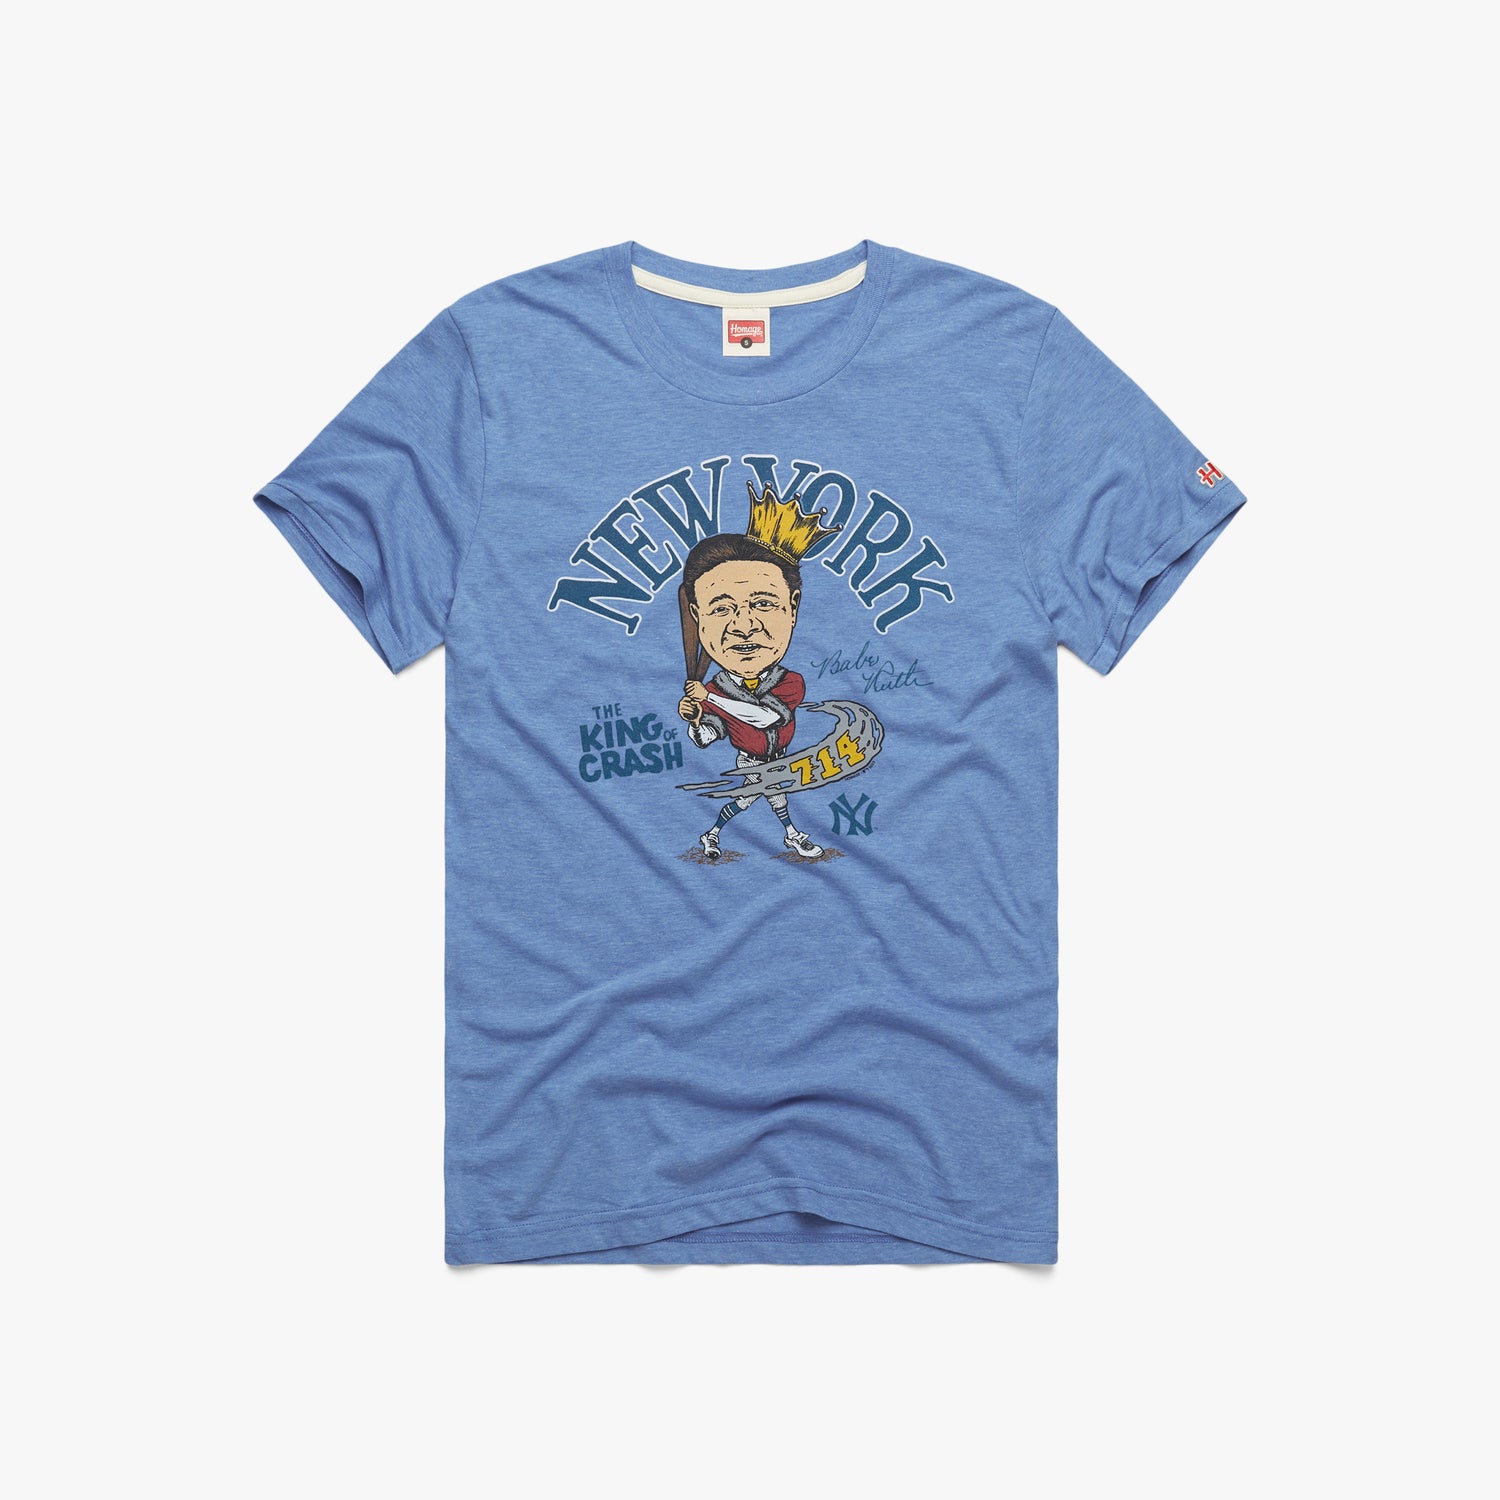 Yankees Babe Ruth Signature T-Shirt from Homage. | Light Blue | Vintage Apparel from Homage.